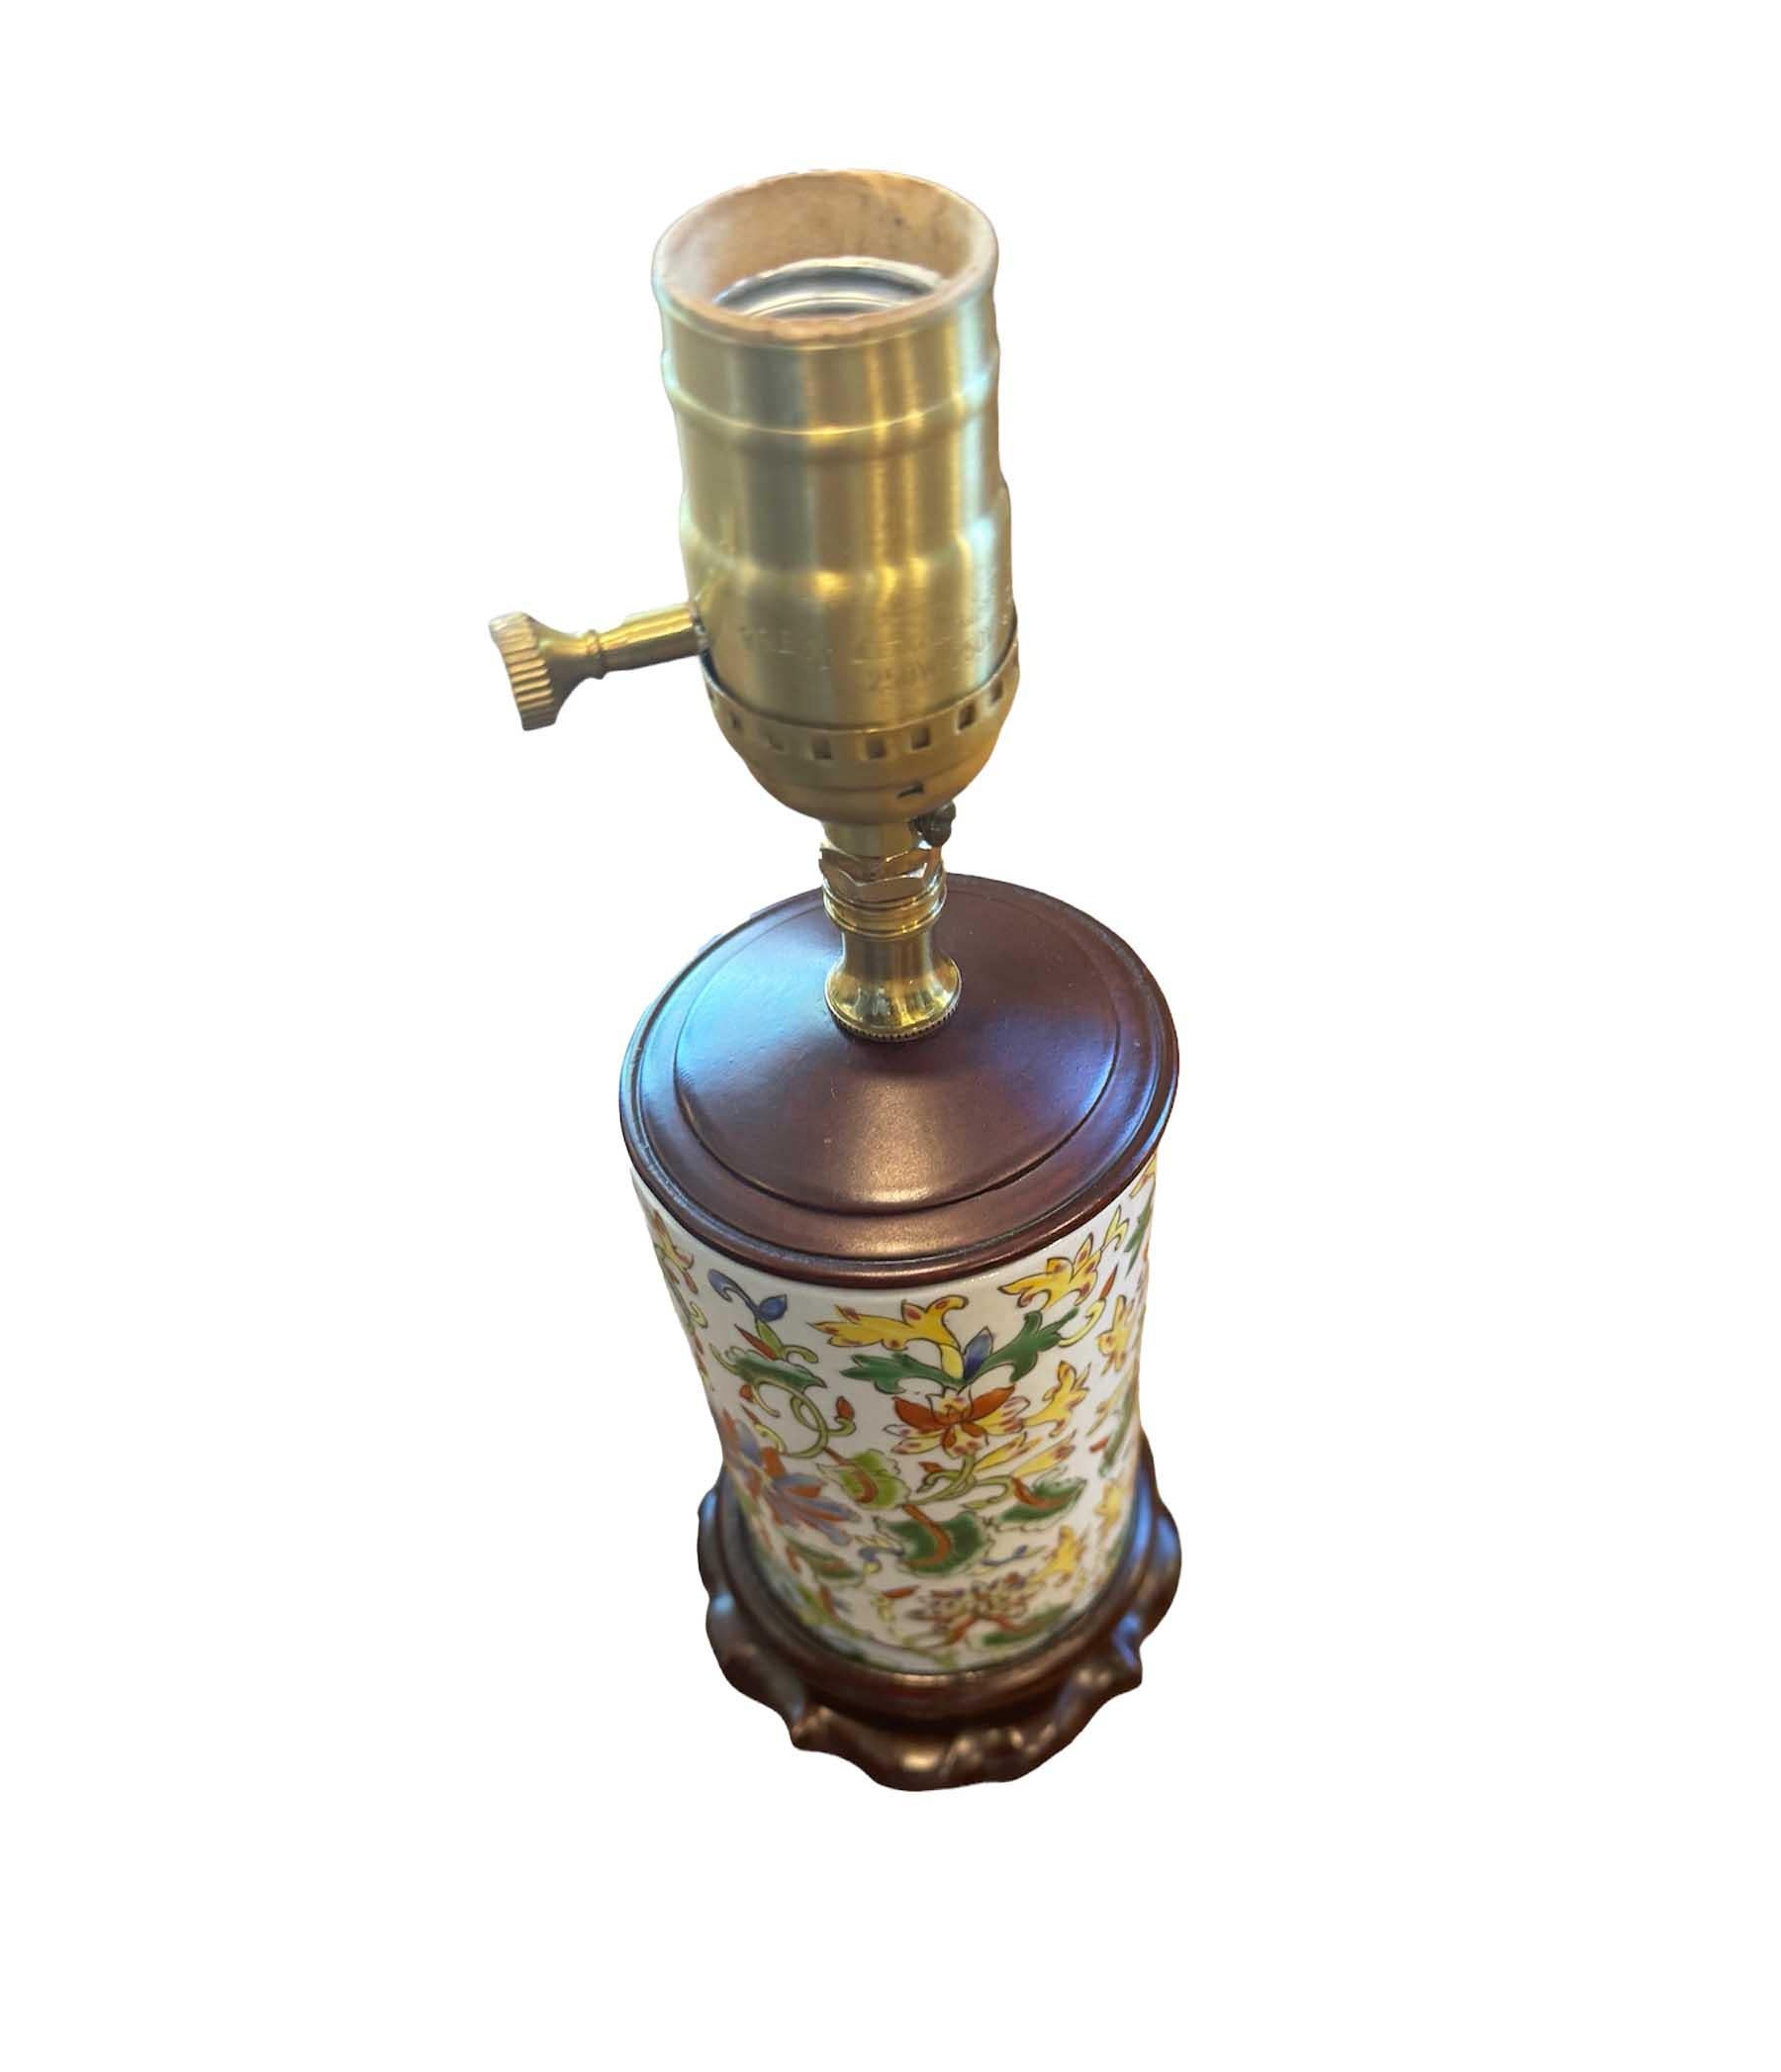 Embrace the allure of history and culture with this remarkable antique Chinese famille rose cylinder vase lamp. Crafted with exquisite artistry, this piece showcases intricate designs in vibrant colors typical of the famille rose style. Adorning the